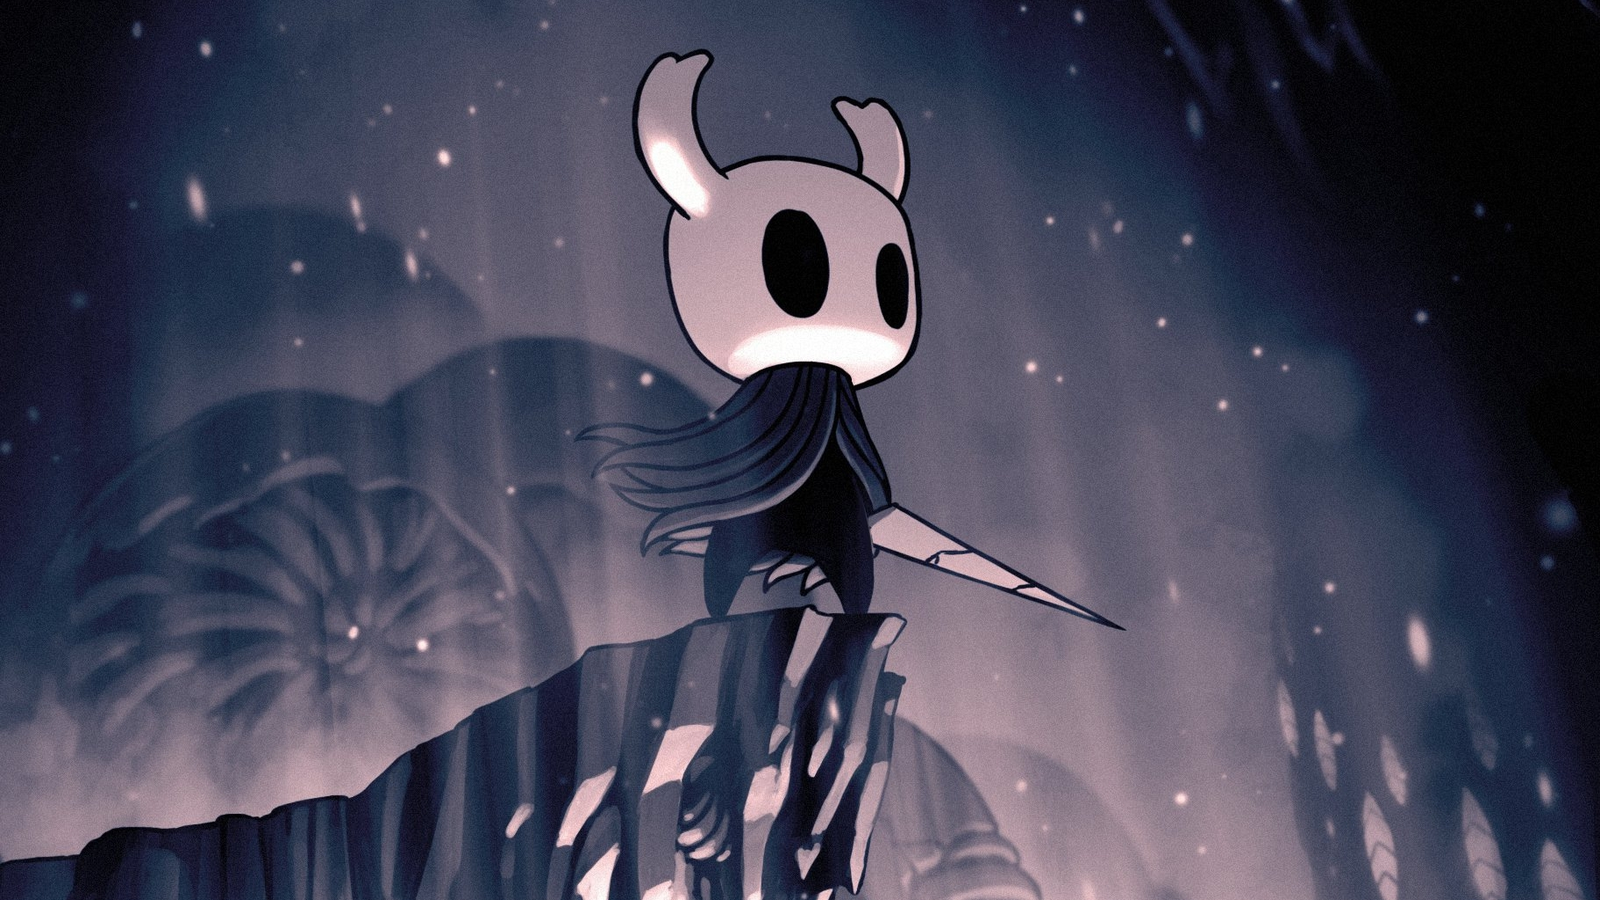 Physical edition of Hollow Knight cancelled